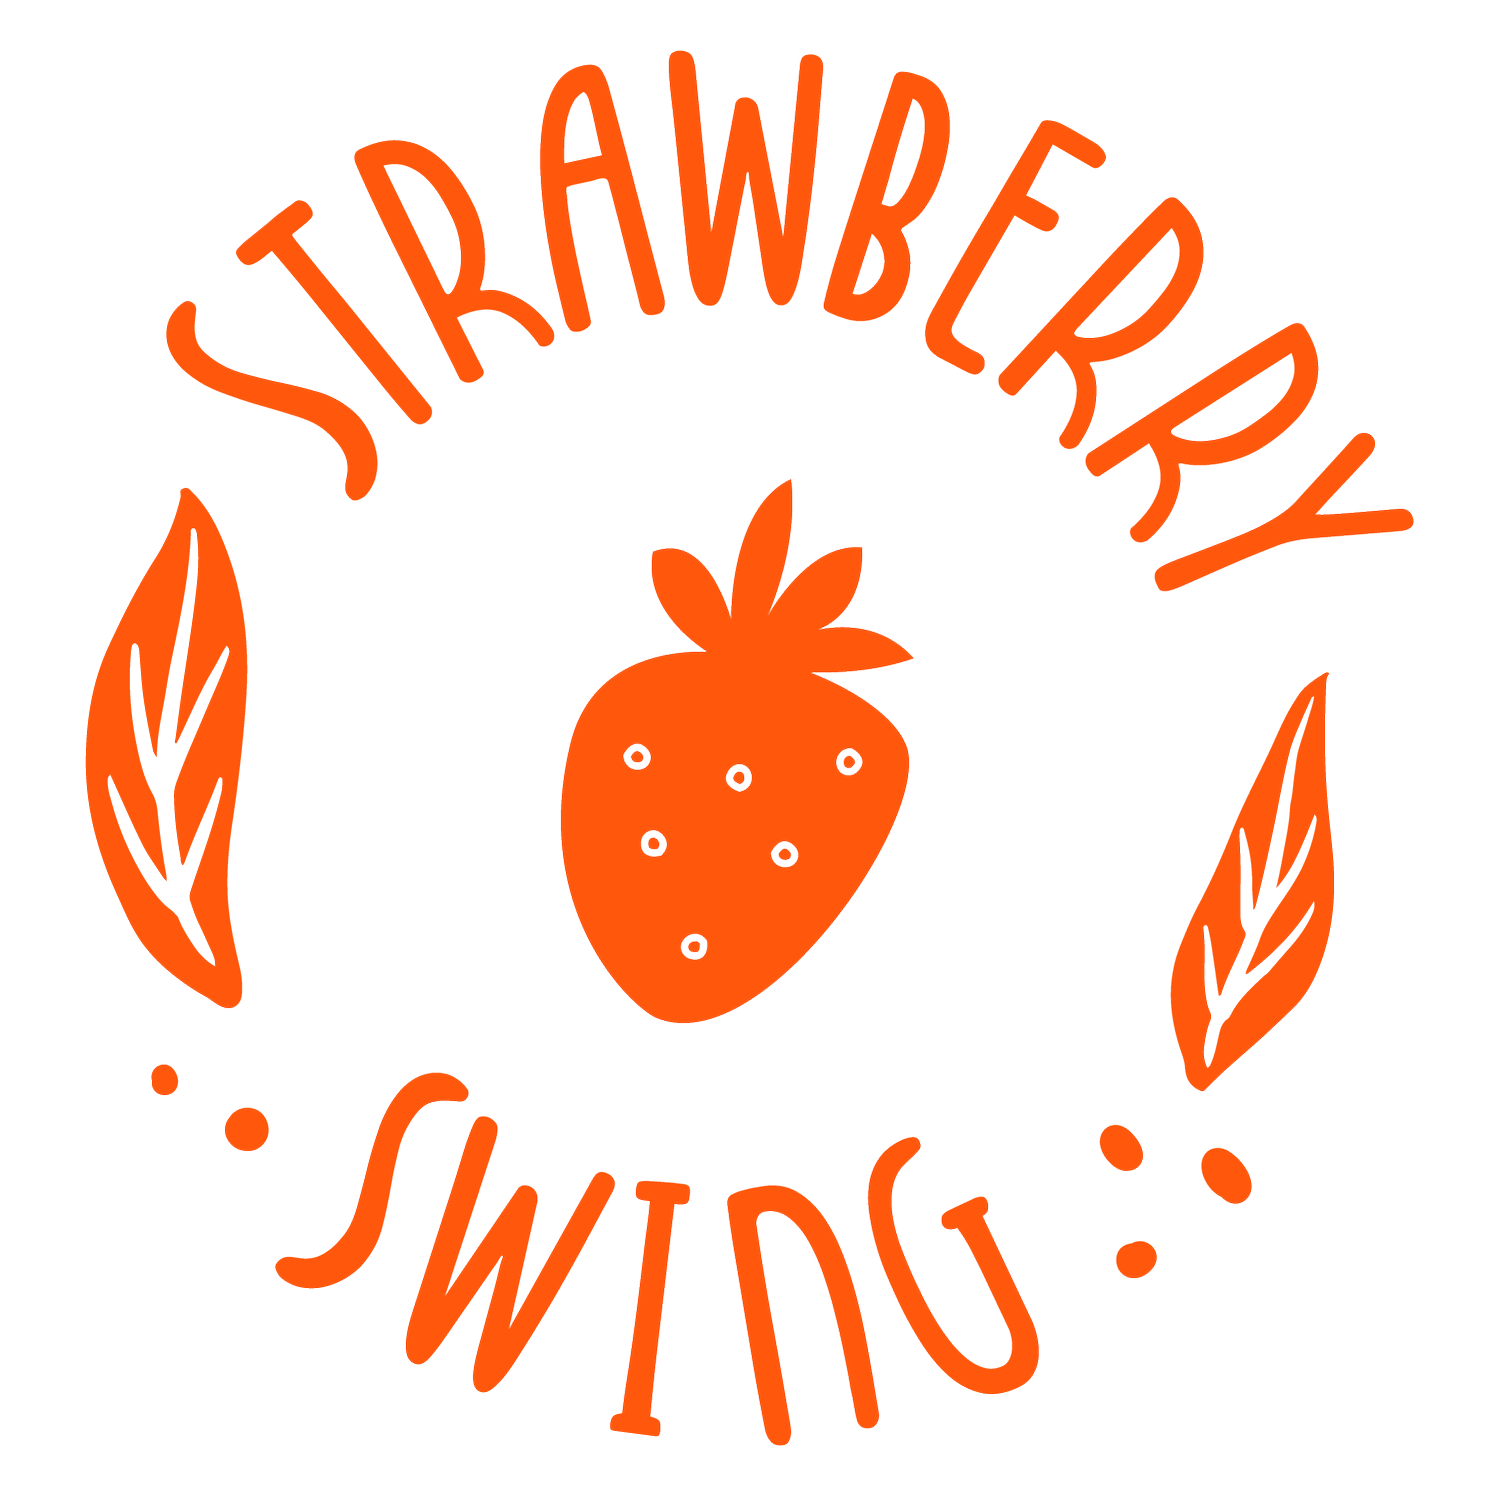 The Strawberry Swing